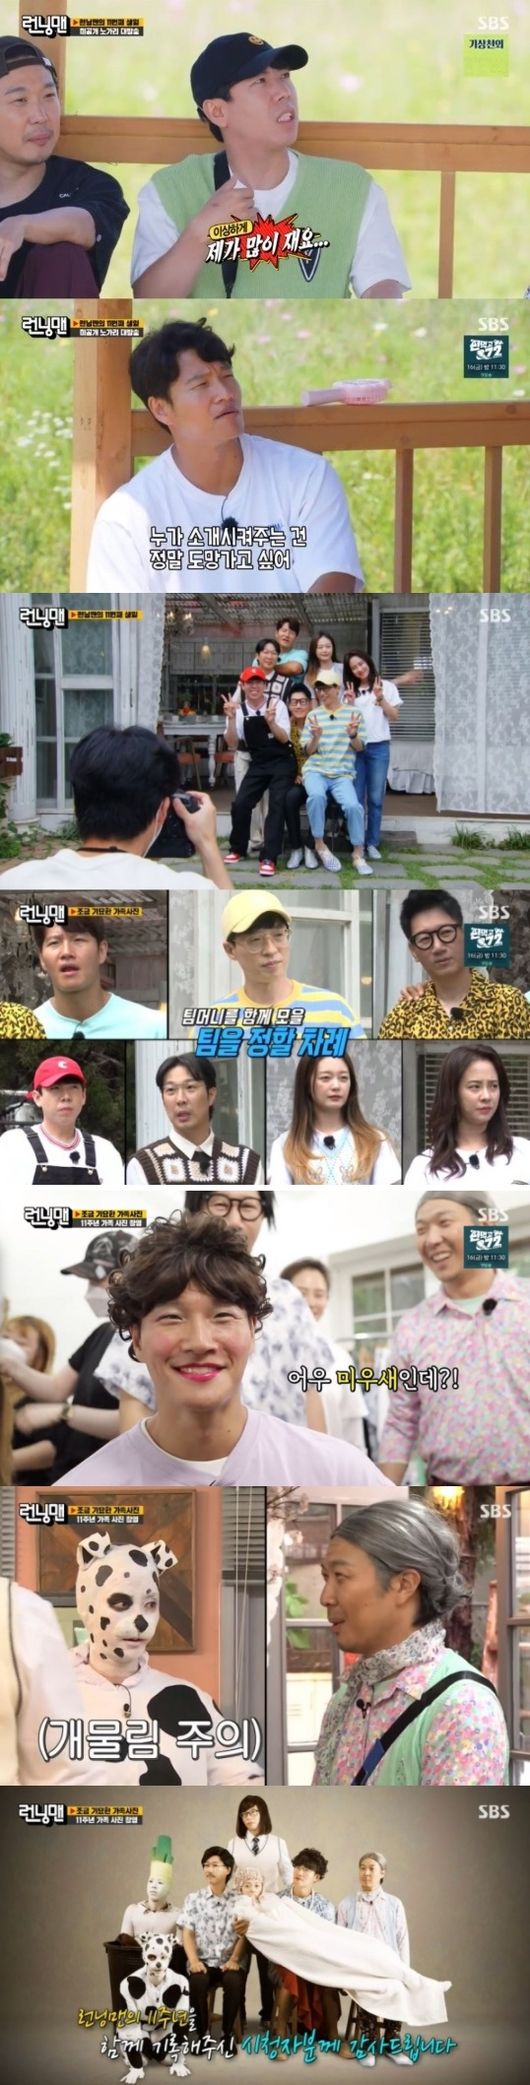 Running Man celebrated its 11th anniversary and gave a constant smile.The SBS entertainment program Running Man, which was broadcast on the 11th, recorded an average of 3% of 2049 TV viewer ratings (hereinafter based on Nielsen Korea metropolitan area, furniture), maintaining the top spot in the same time zone, and the highest TV viewer ratings per minute soared to 6.6%.The broadcast was decorated with a slightly strange Family Portrait Race on the day when Running Man, which started its first broadcast on July 11, 2010, celebrated its 11th anniversary.Running Man is the longest-running variety program currently on air, and has been broadcast 563 times so far and has been steadily loved by viewers.Its possible because the viewers have been watching us, Yoo Jae-Suk said, according to Thank You.Following the release of the rice flour on Nogari Day, which became a hot topic on last weeks broadcast, the members took a nice pose with their personal photo time from the opening.Haha took first place in photogenic, and Ji Suk-jin, reminiscent of One Leopard, laughed at the bottom.Since then, the members have divided into three teams to take a slightly strange Family Portrait.Haha, Yang Se-chan and Song Ji-hyo teams topped the list, but Song Ji-hyo won the Dalmatian character makeup after the role auction.With everyone sorry, Song Ji-hyo gave a laughing bomb, taking a pissing posture in Dalmatian without care.In addition, Yang Se-chan took a family portrait of Ji Suk-jin as a pet diffus, Ji Suk-jin as a father, Kim Jong Kook as a mother, Haha as a grandmother, Yoo Jae-Suk as a middle school girl, and Jeon So-min as a newborn baby.The scene was the best TV viewer ratings per minute with 6.6%.SBS is provided.